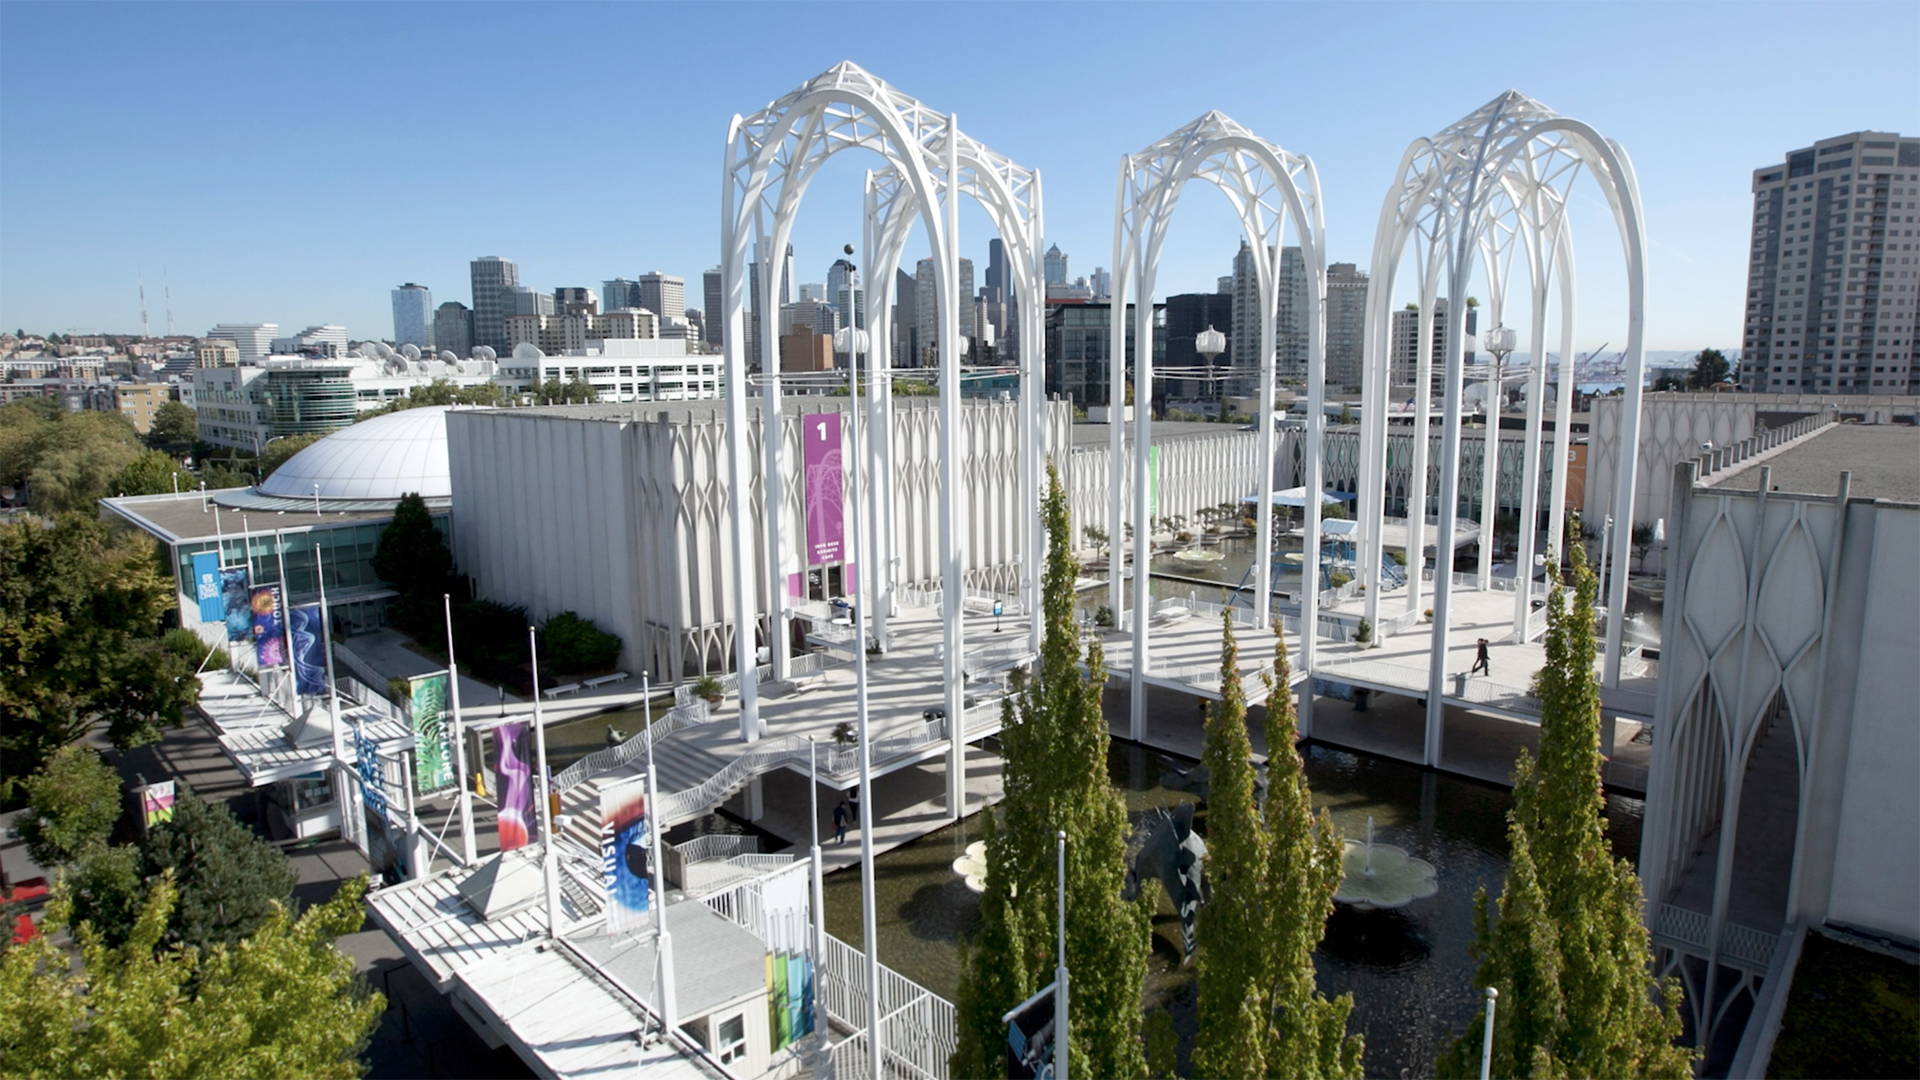 PacSci campus view with arches